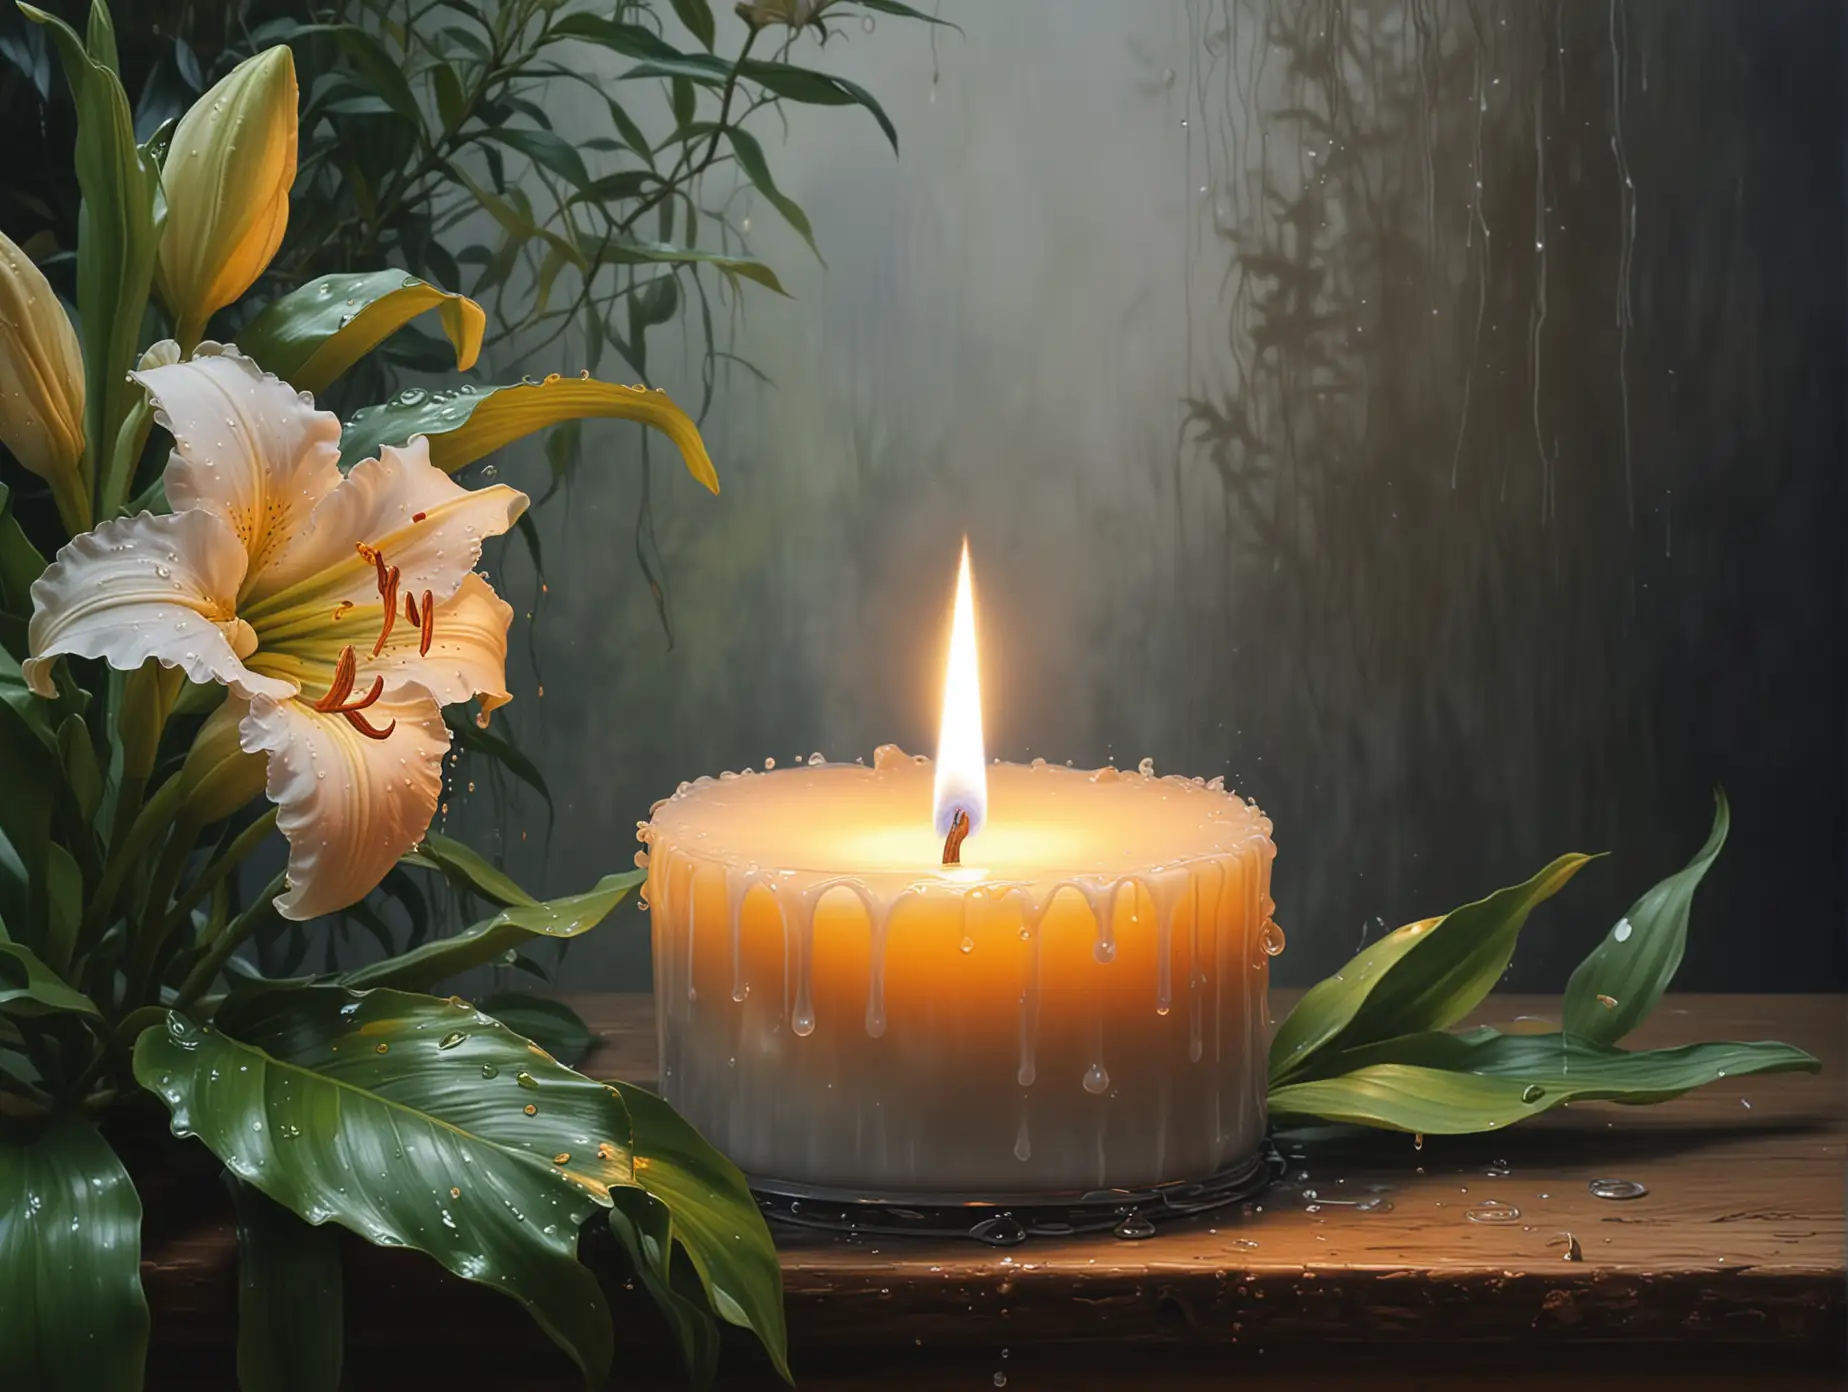 hyperrealistic painting with a burning candle with dripping wax, next to a lily branch and green leaves, blurred flowers in the background